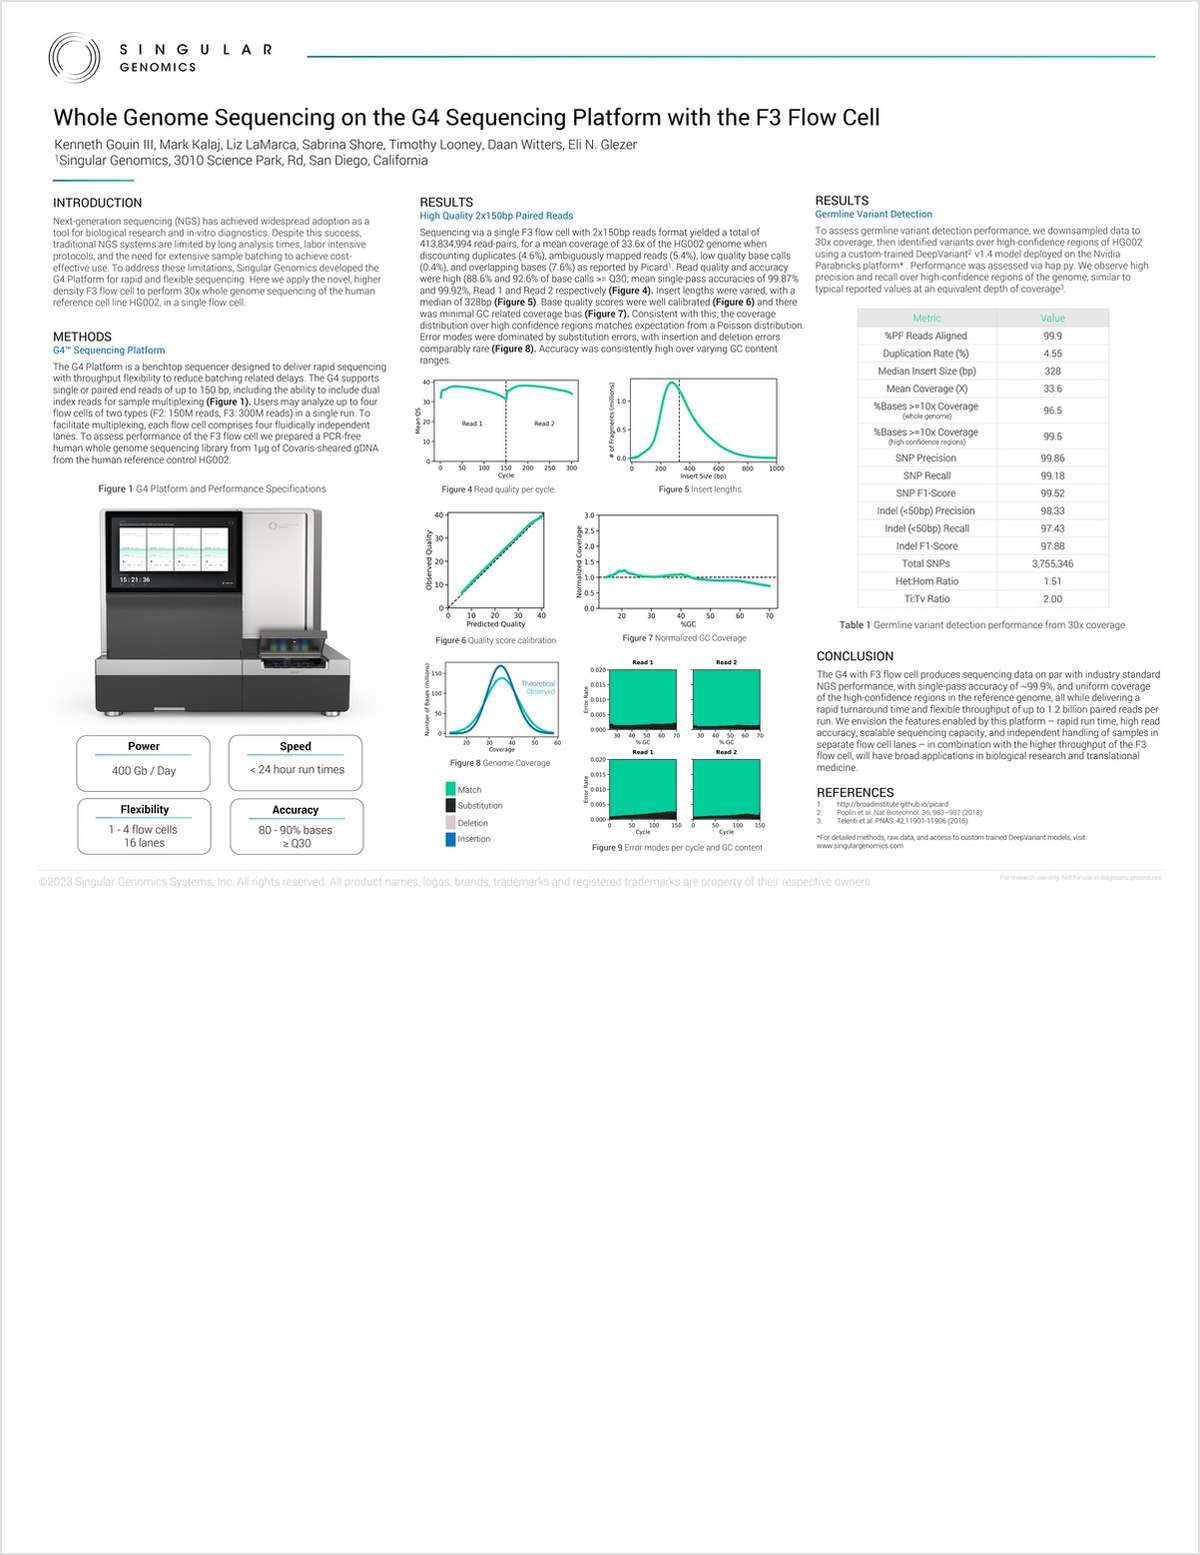 Whole Genome Sequencing on the G4 Sequencing Platform with the F3 Flow Cell